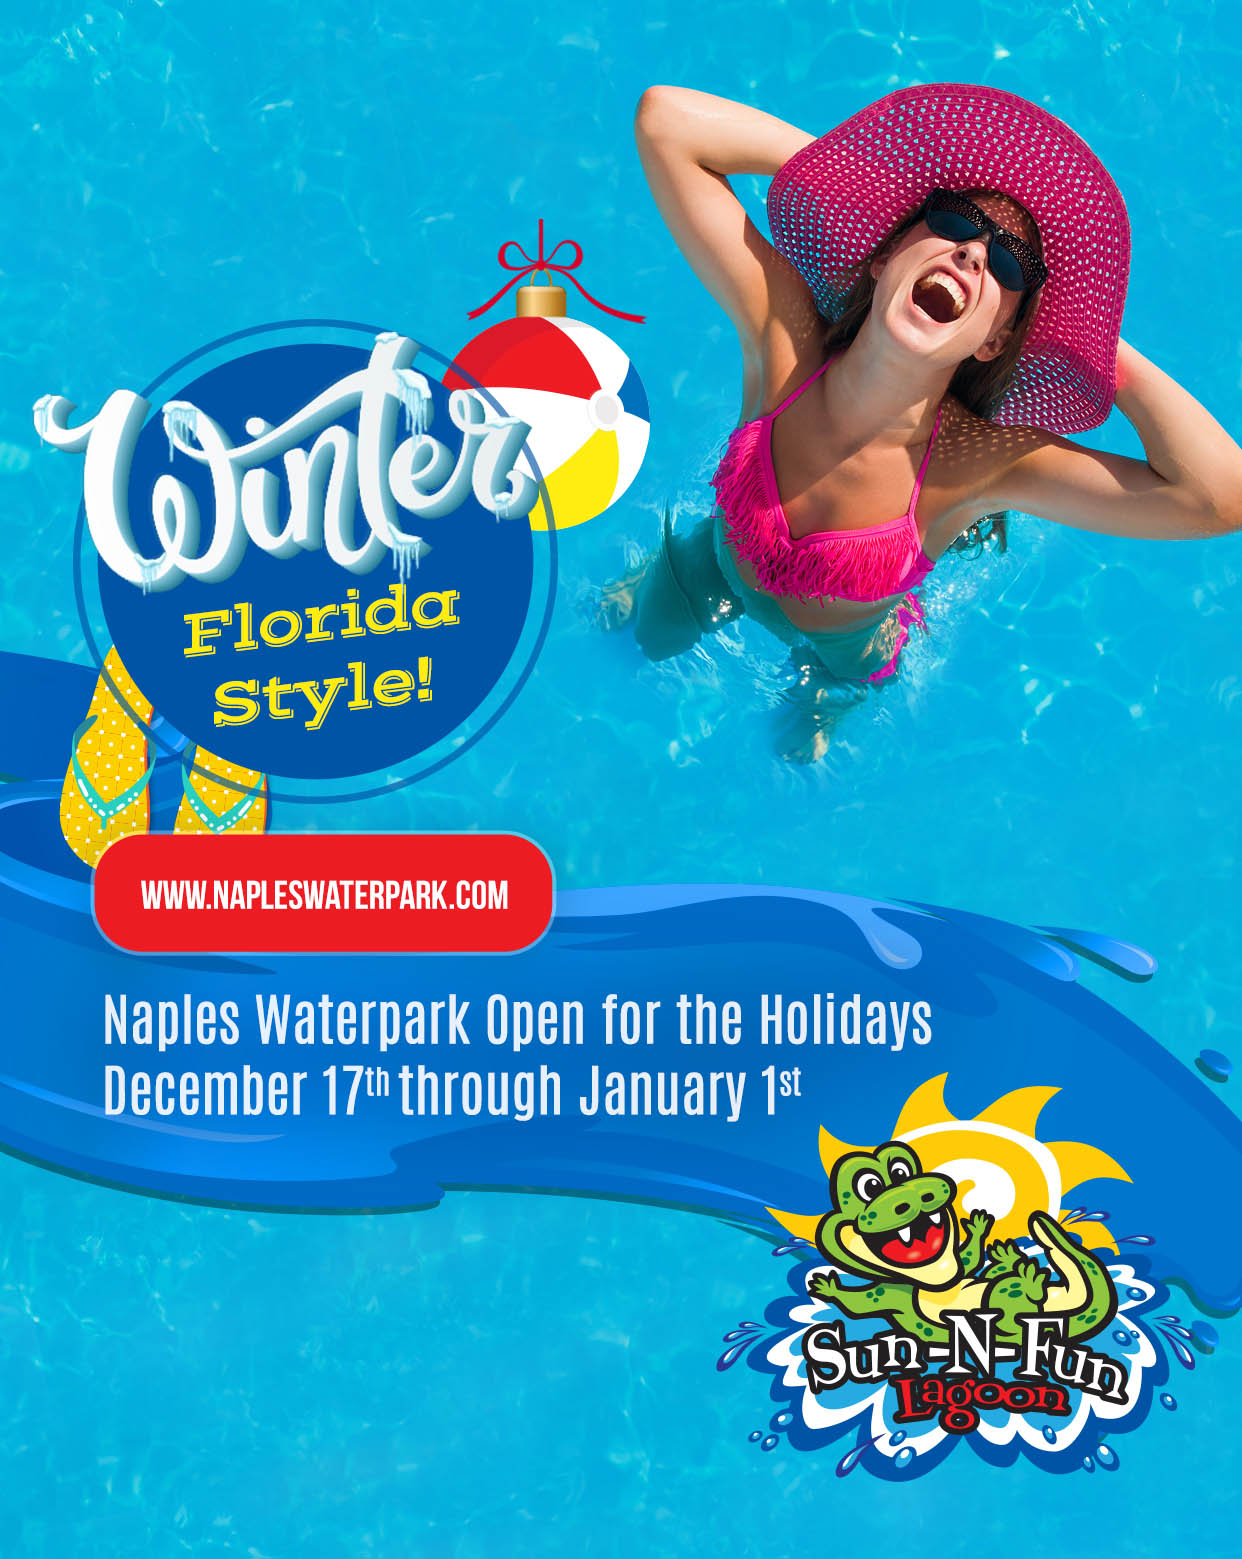 Naples Waterpar Open for the Holidays, December 17th through January 1st